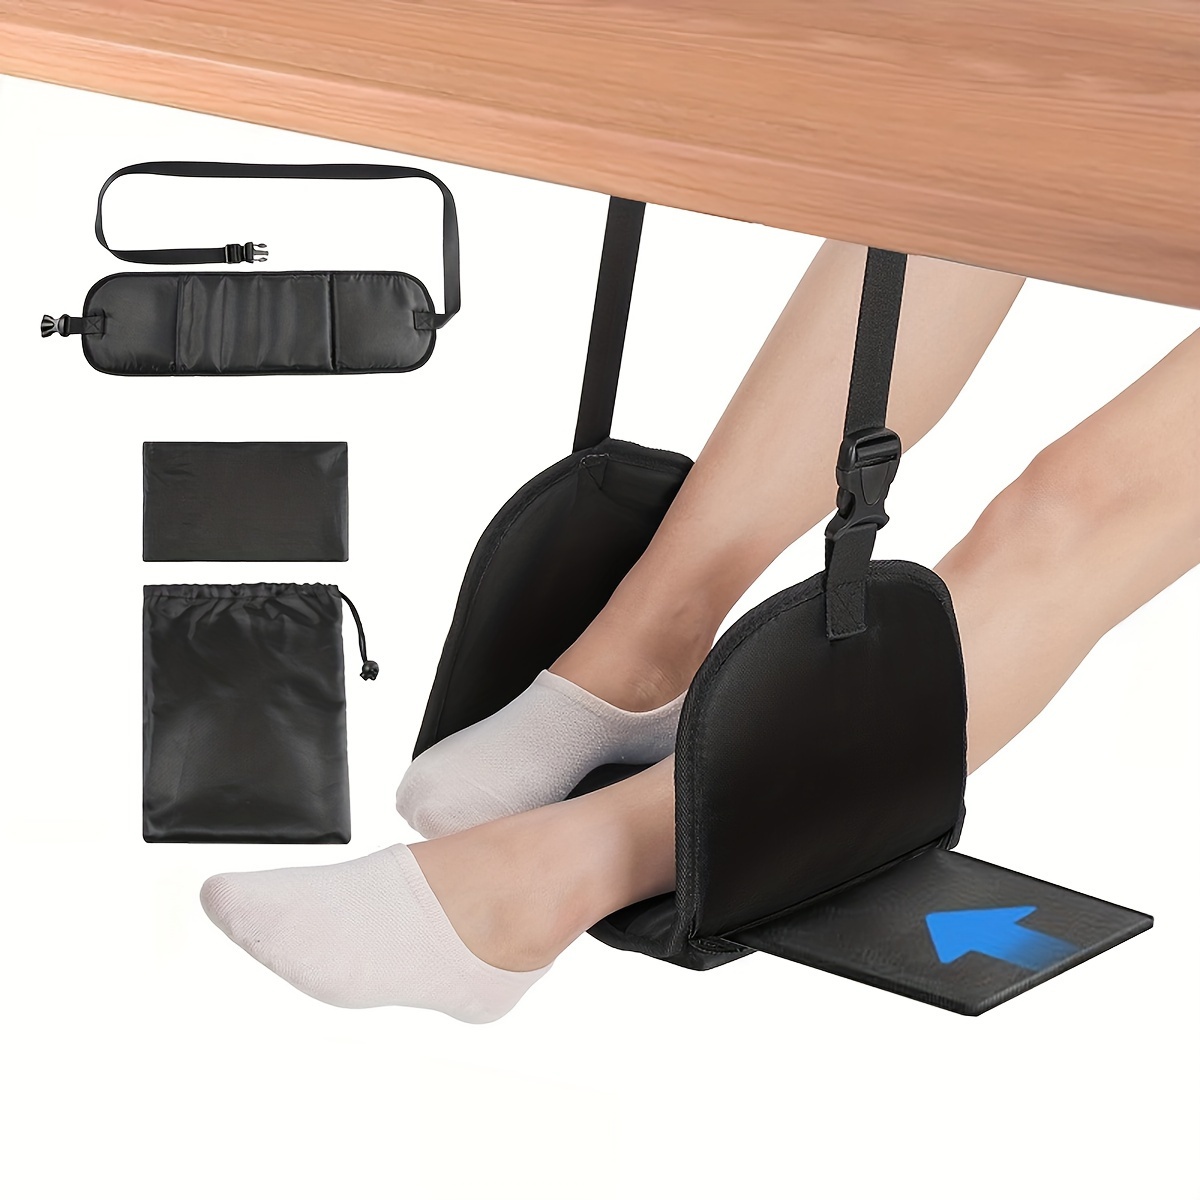 

Adjustable With Detachable Support Plate, Portable Airplane Hammock Foot Rest, Lightweight Desk Foot Hammock, Polyester Material Casual Style Travel Accessory